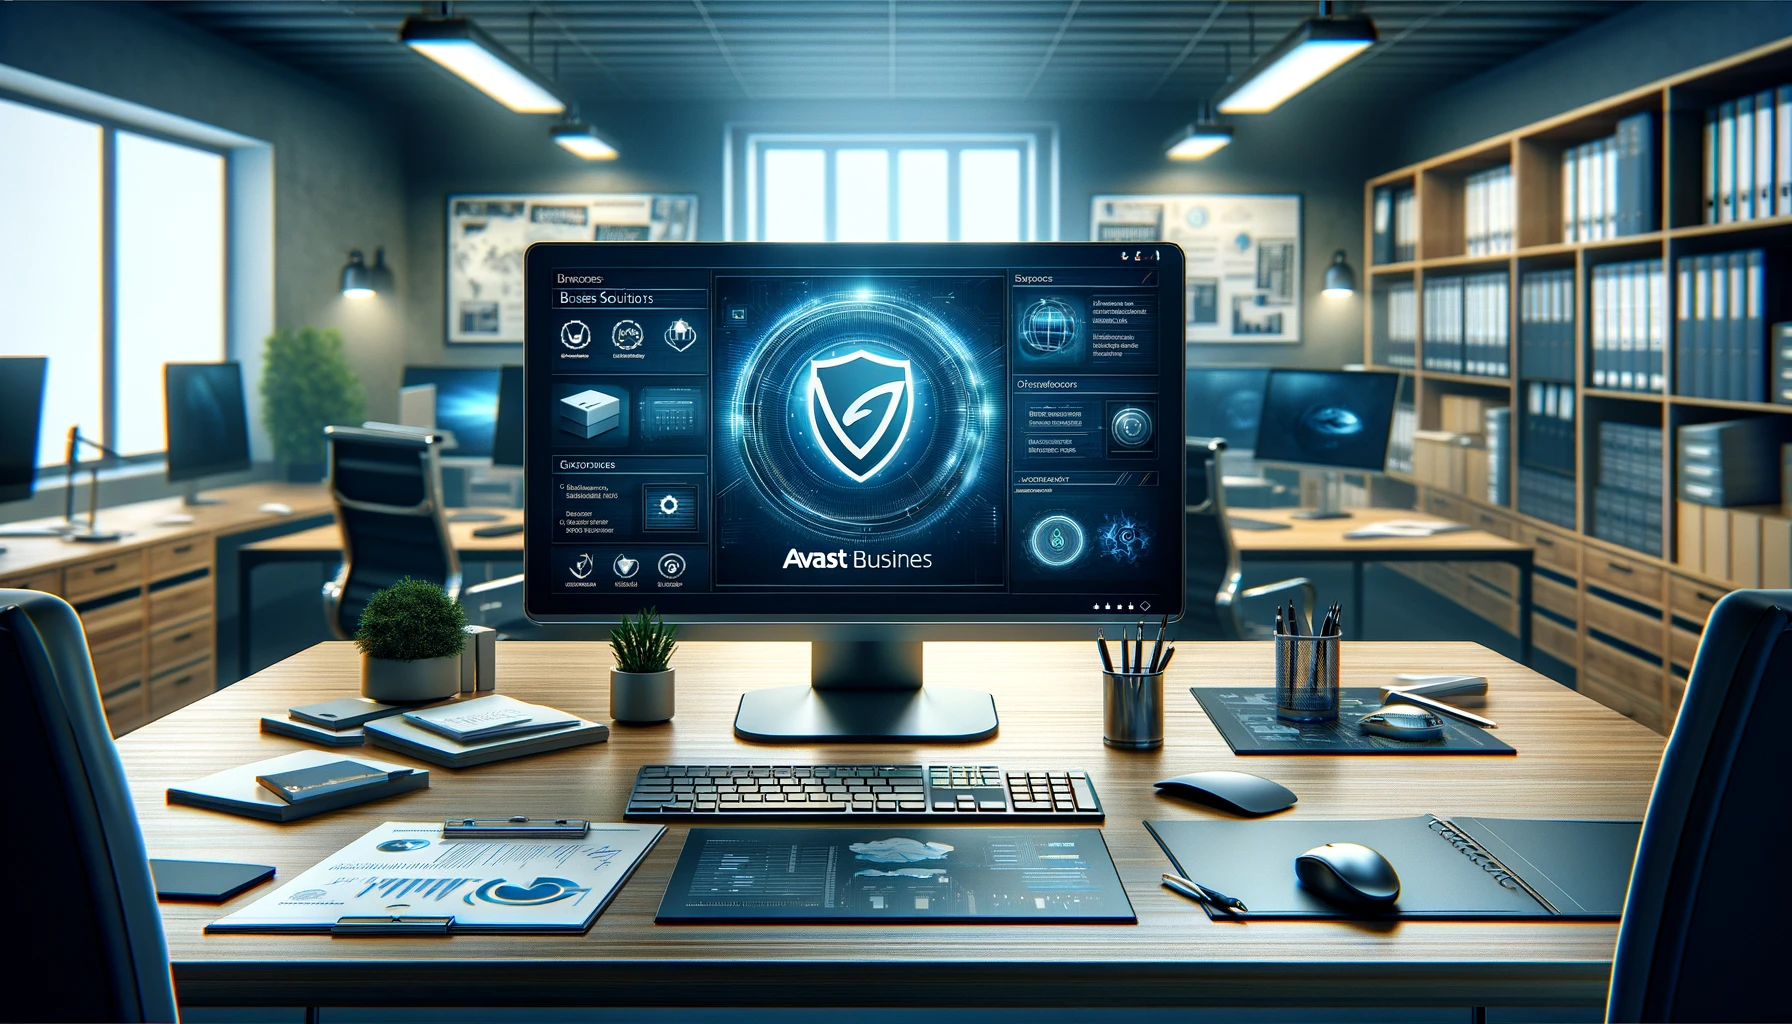 The image above features a 3D stock photo depicting Avast Business Solutions in a corporate office setting, showcasing the interface on a central monitor and highlighting its integral role in cybersecurity within modern business operations.